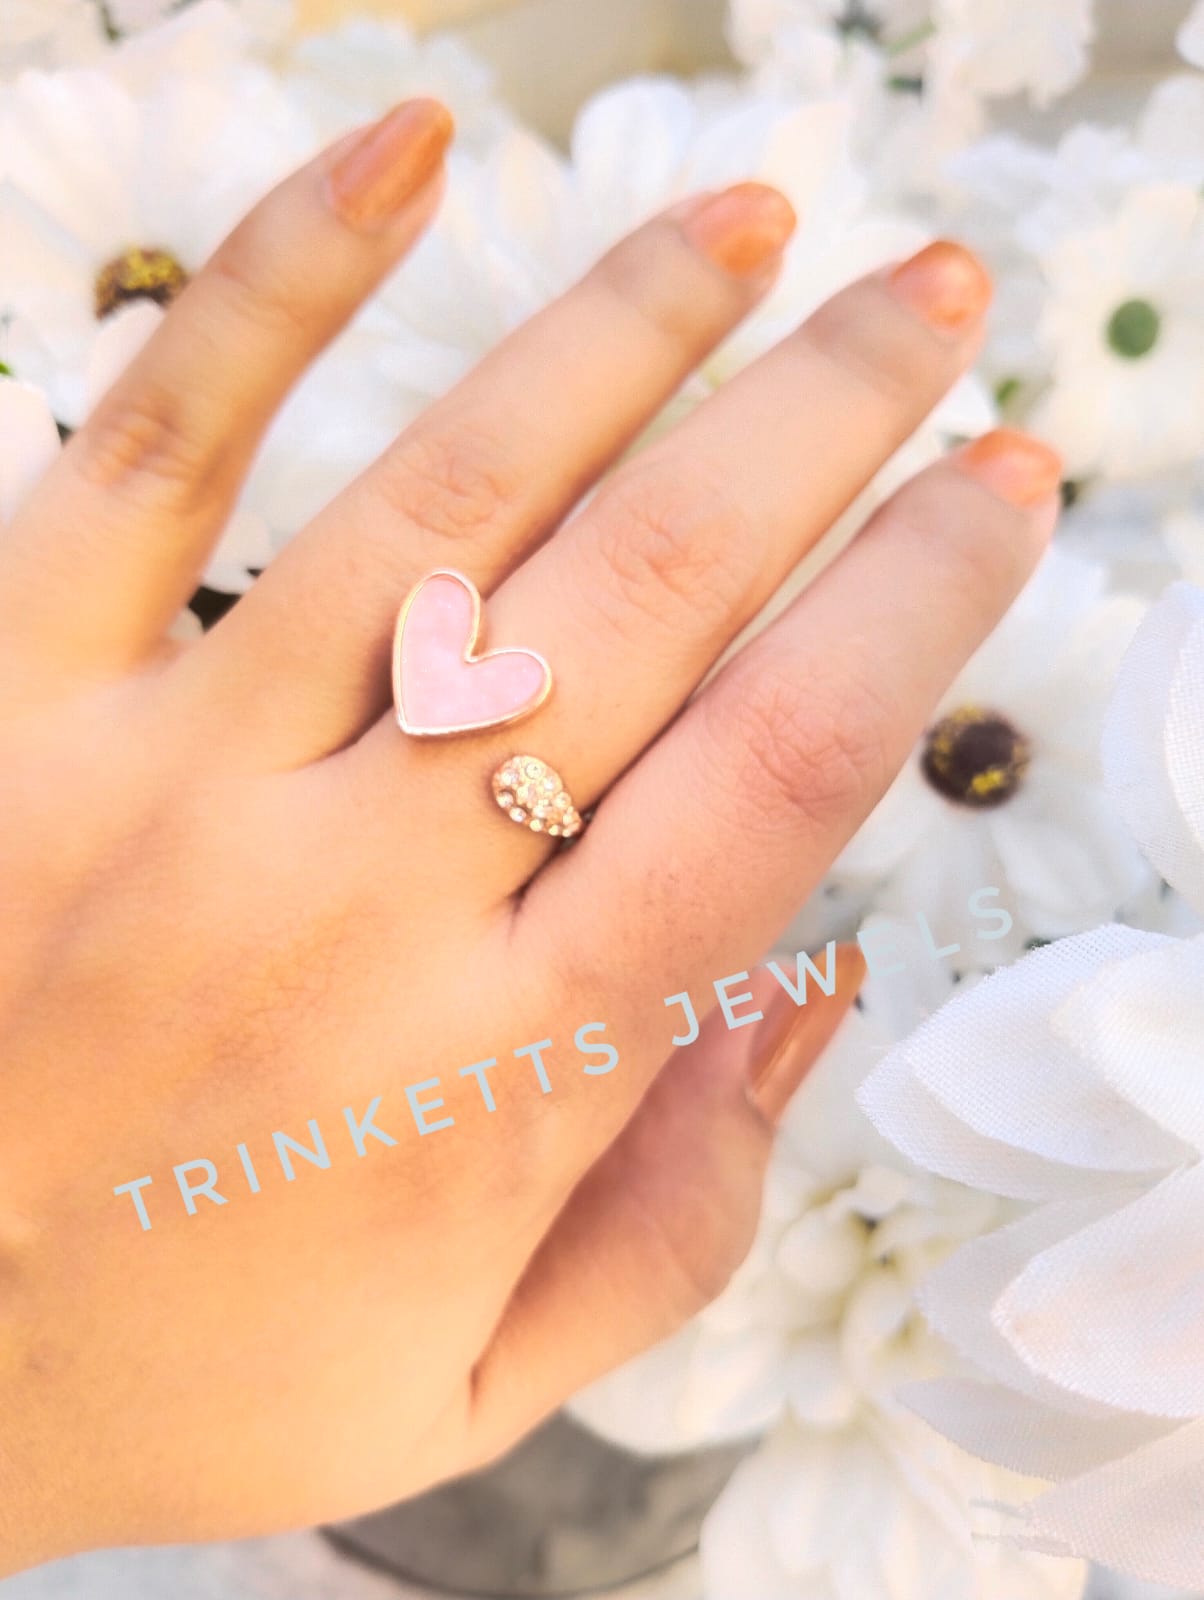 Adjustable baby pink heart ring with glittery marble effect stone framed in gold polish on one end and zircon stones in an oval shape on the other. Elegant and versatile, perfect for adding a touch of glamour to any outfit.